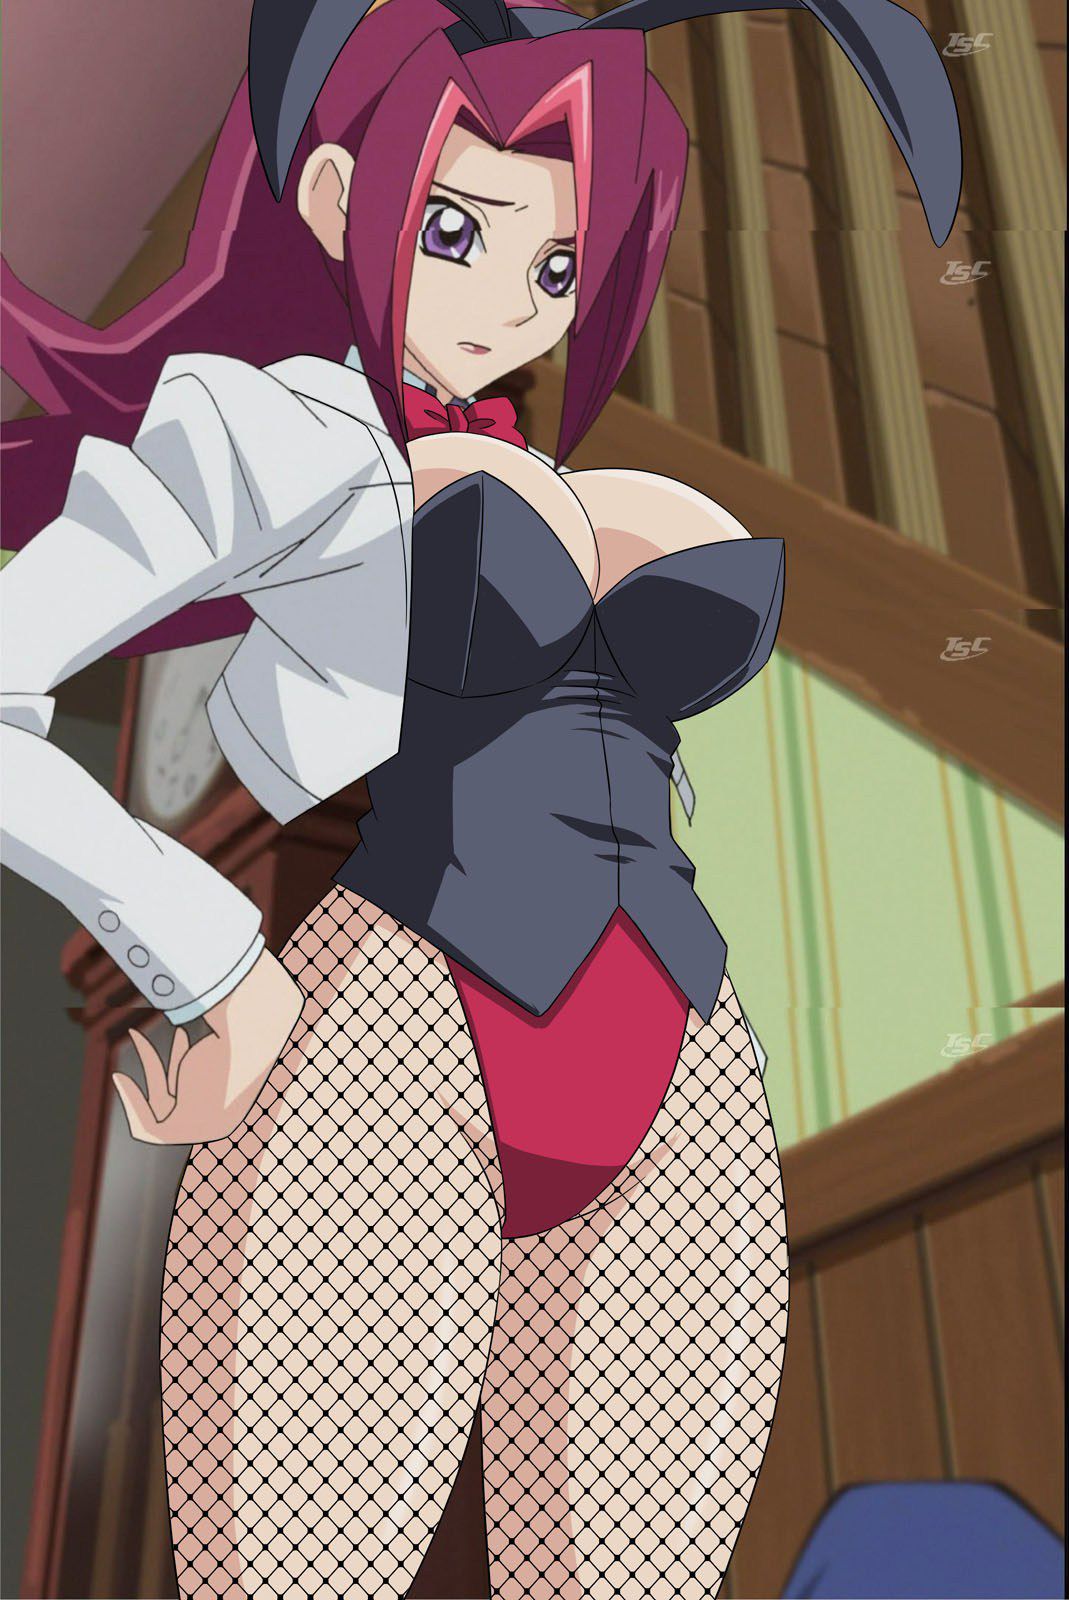 [Yu-Gi-oh] stripping of the heroine such as Black magician Girl Photoshop part2 24